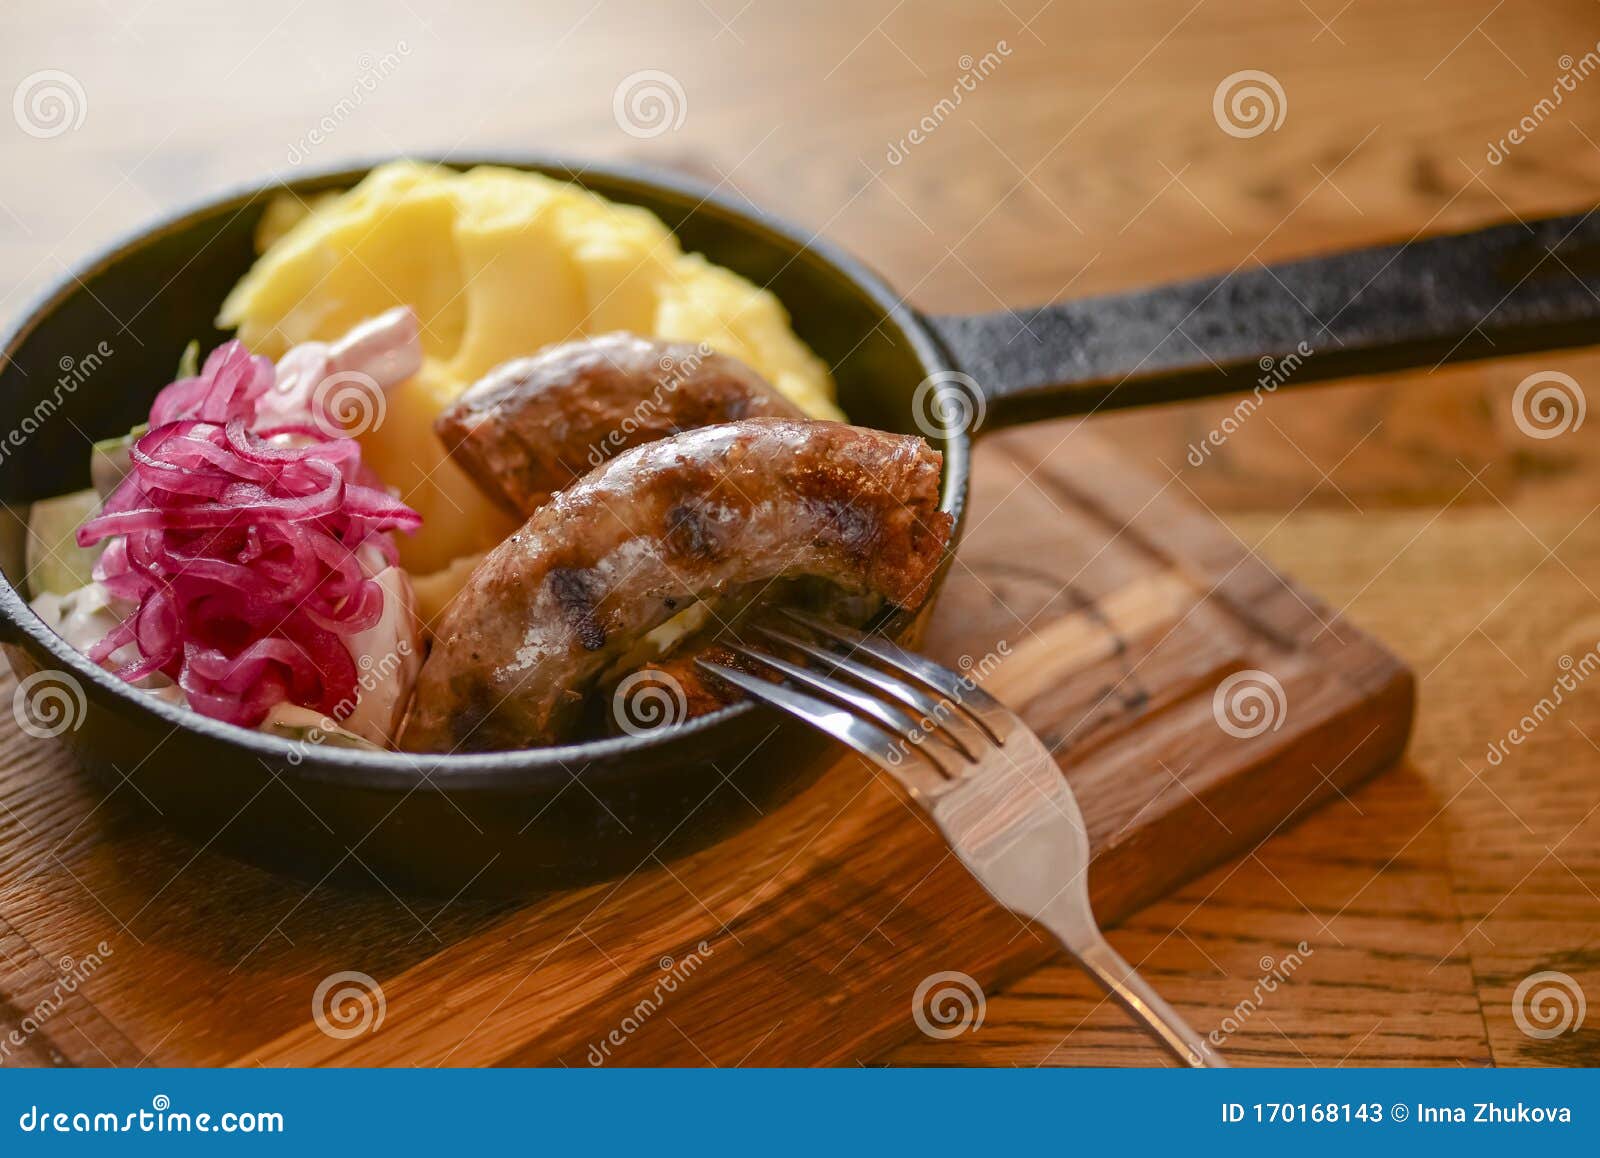 traditional ukrainian cuisine. pork sausages with mashed potatoes and cabagge salad served in a pan.